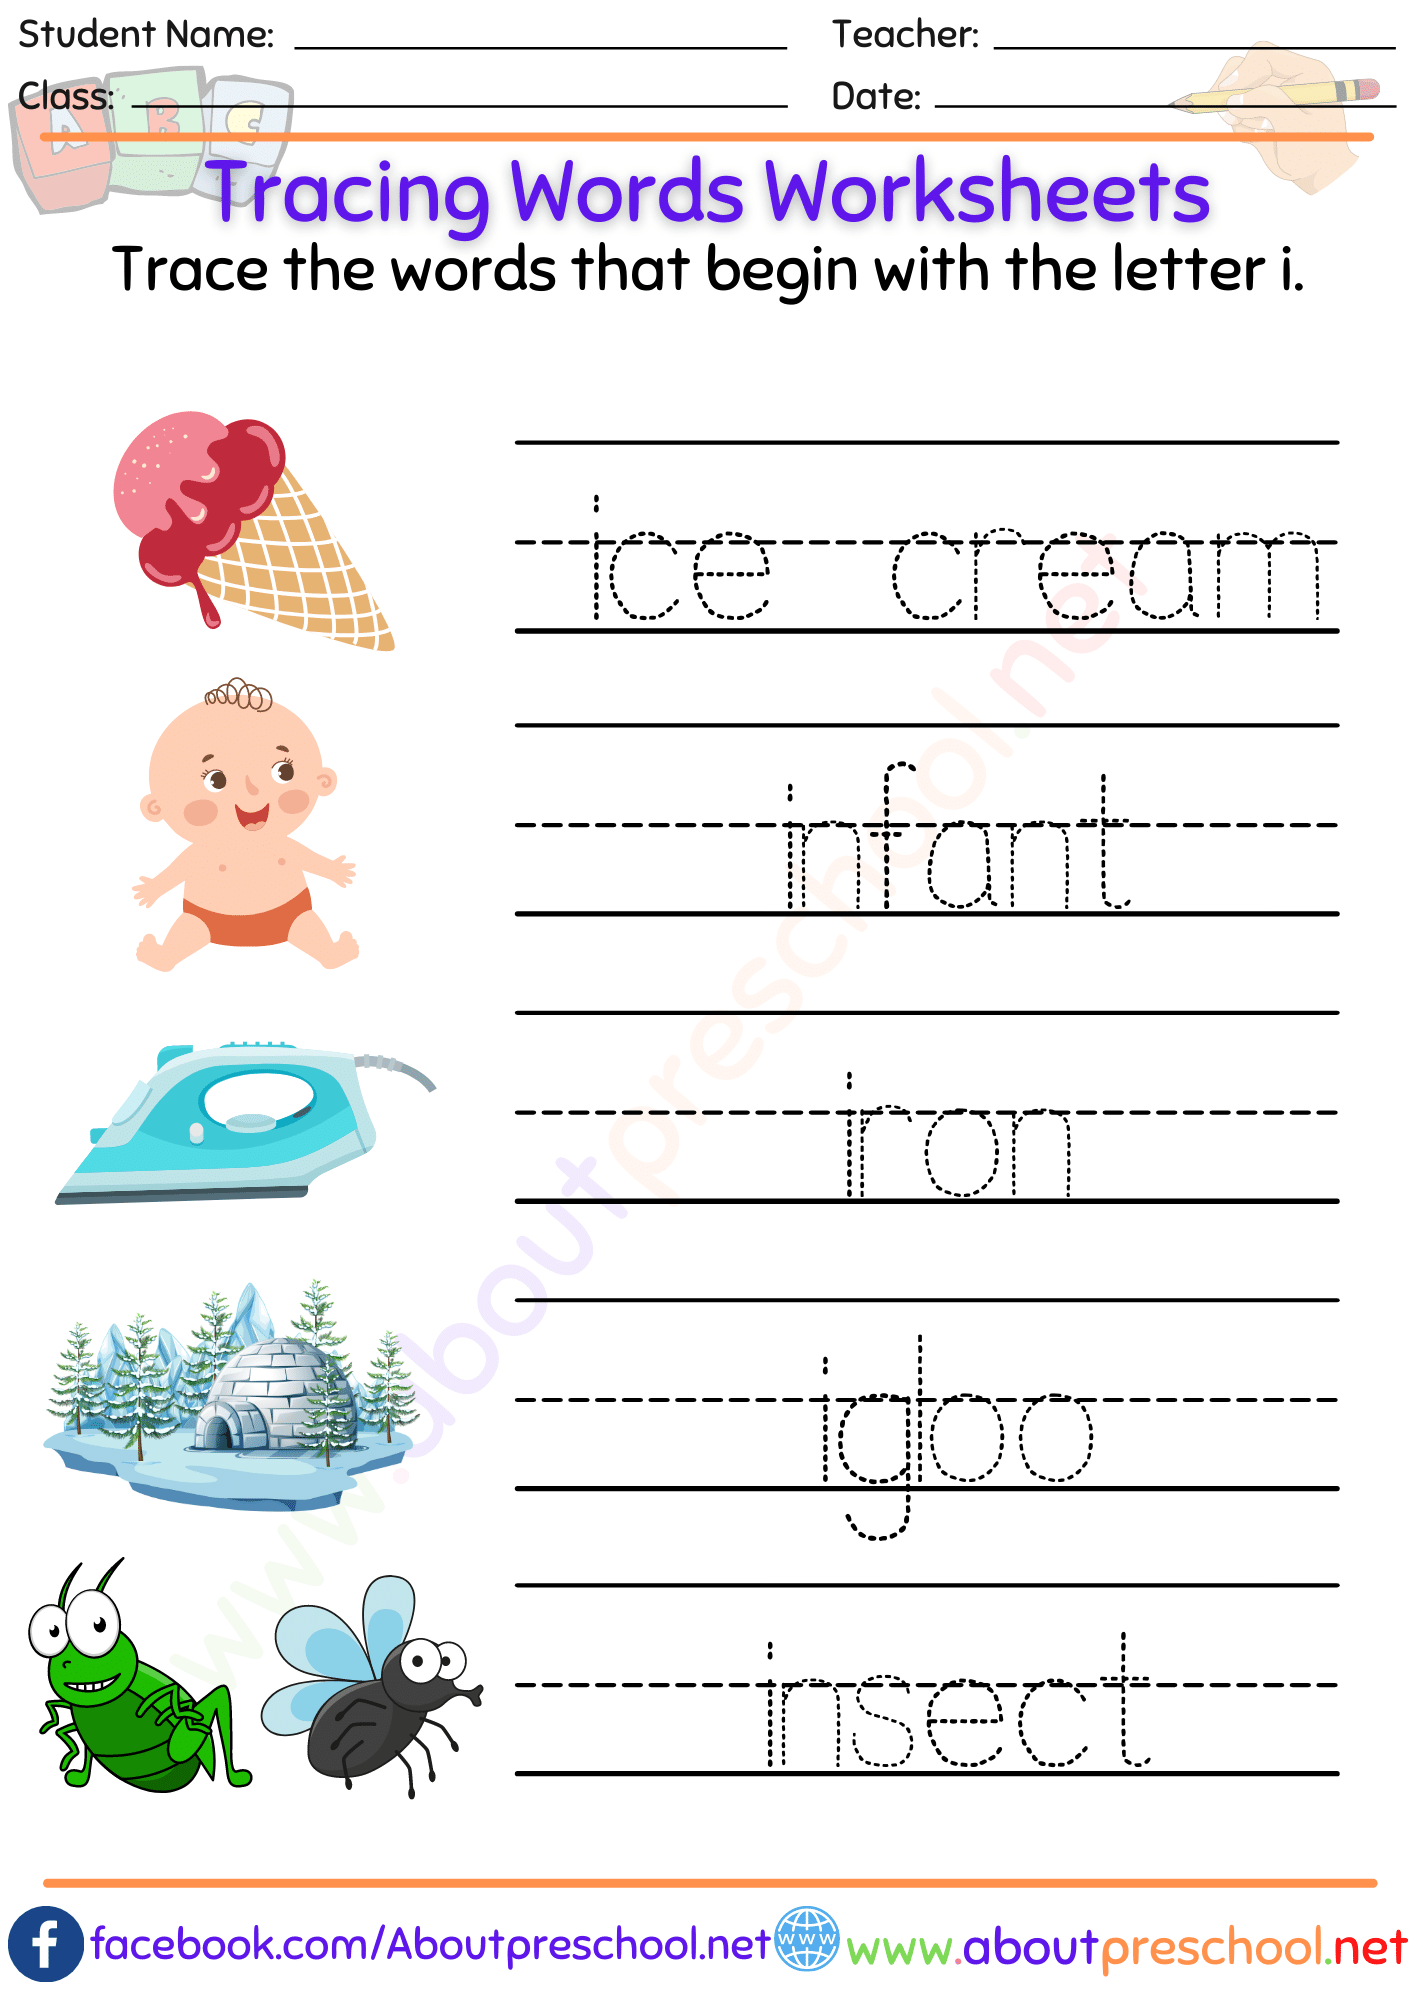 Tracing Words Worksheets-i